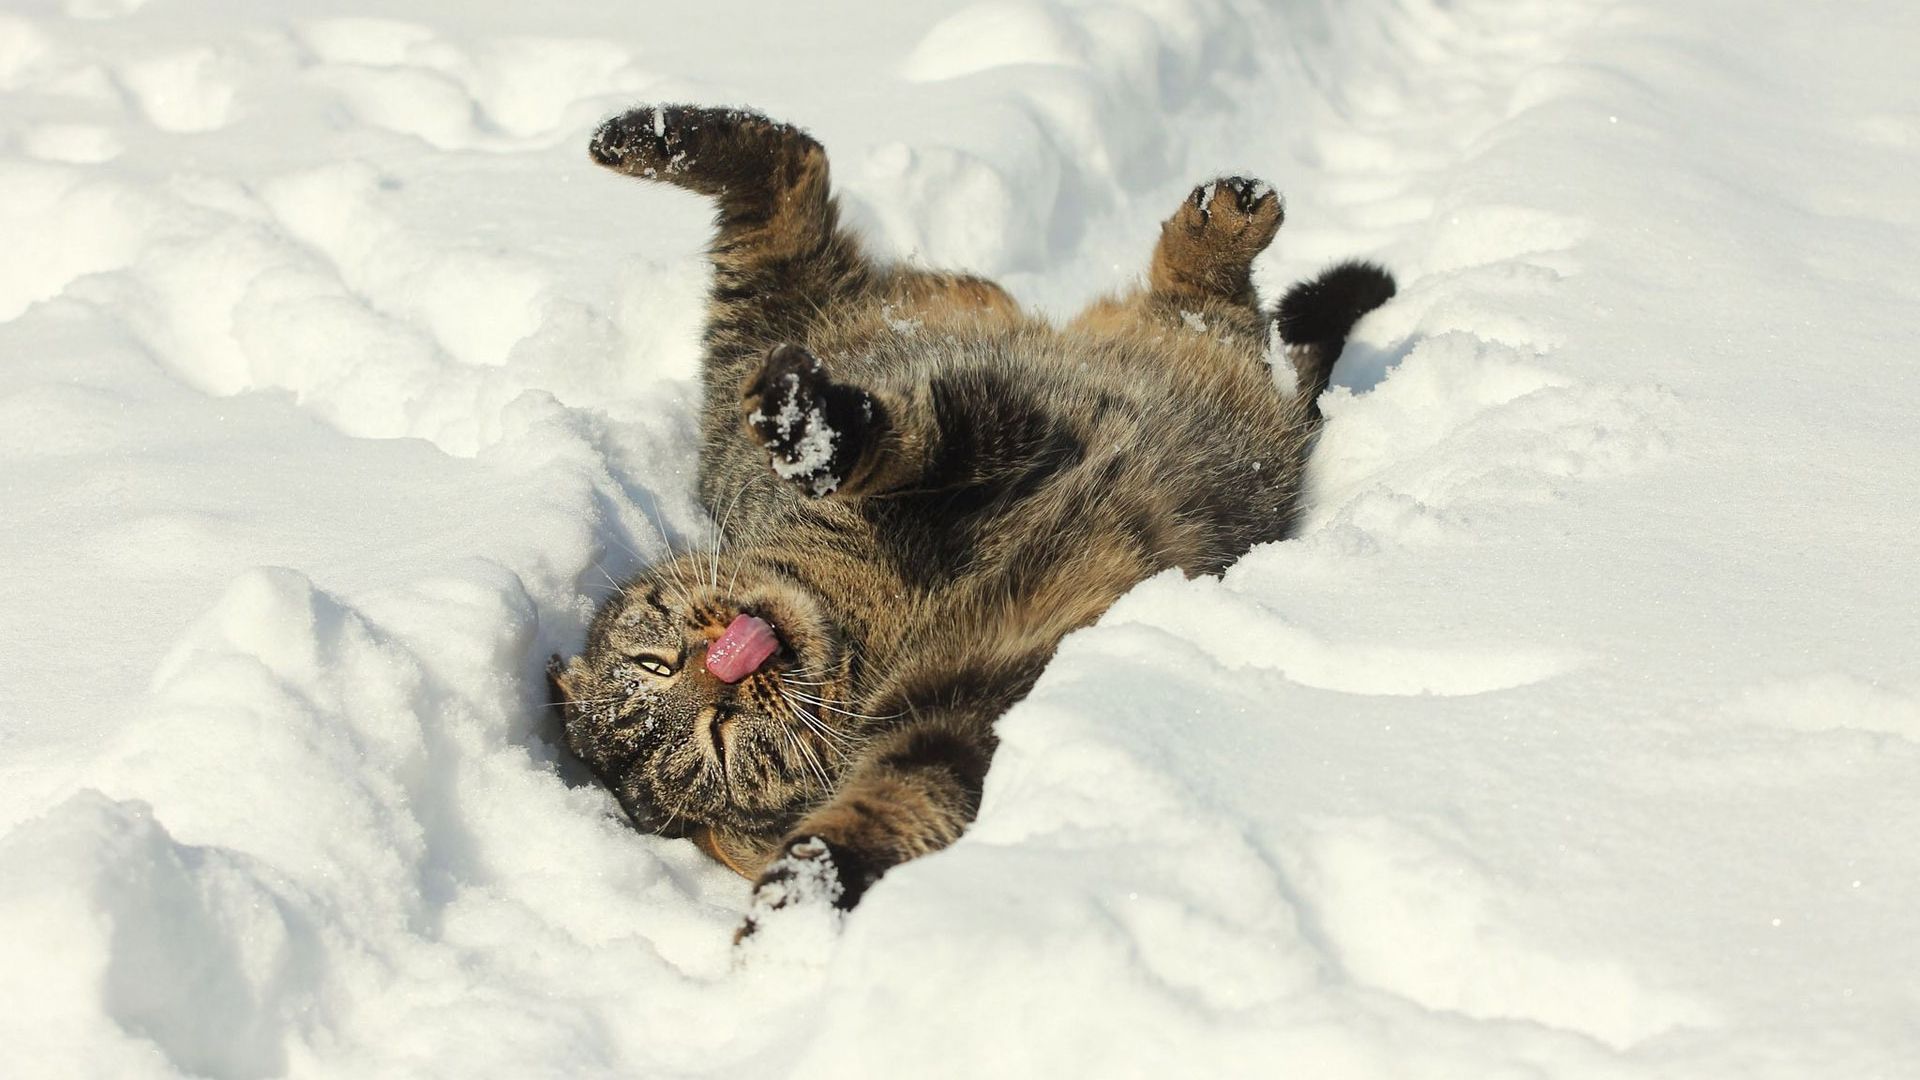 Free download Funny cat in the snow wallpaper Animal wallpaper 23397 [1920x1200] for your Desktop, Mobile & Tablet. Explore Animals in the Snow Wallpaper. Cats in Snow Wallpaper, Horses